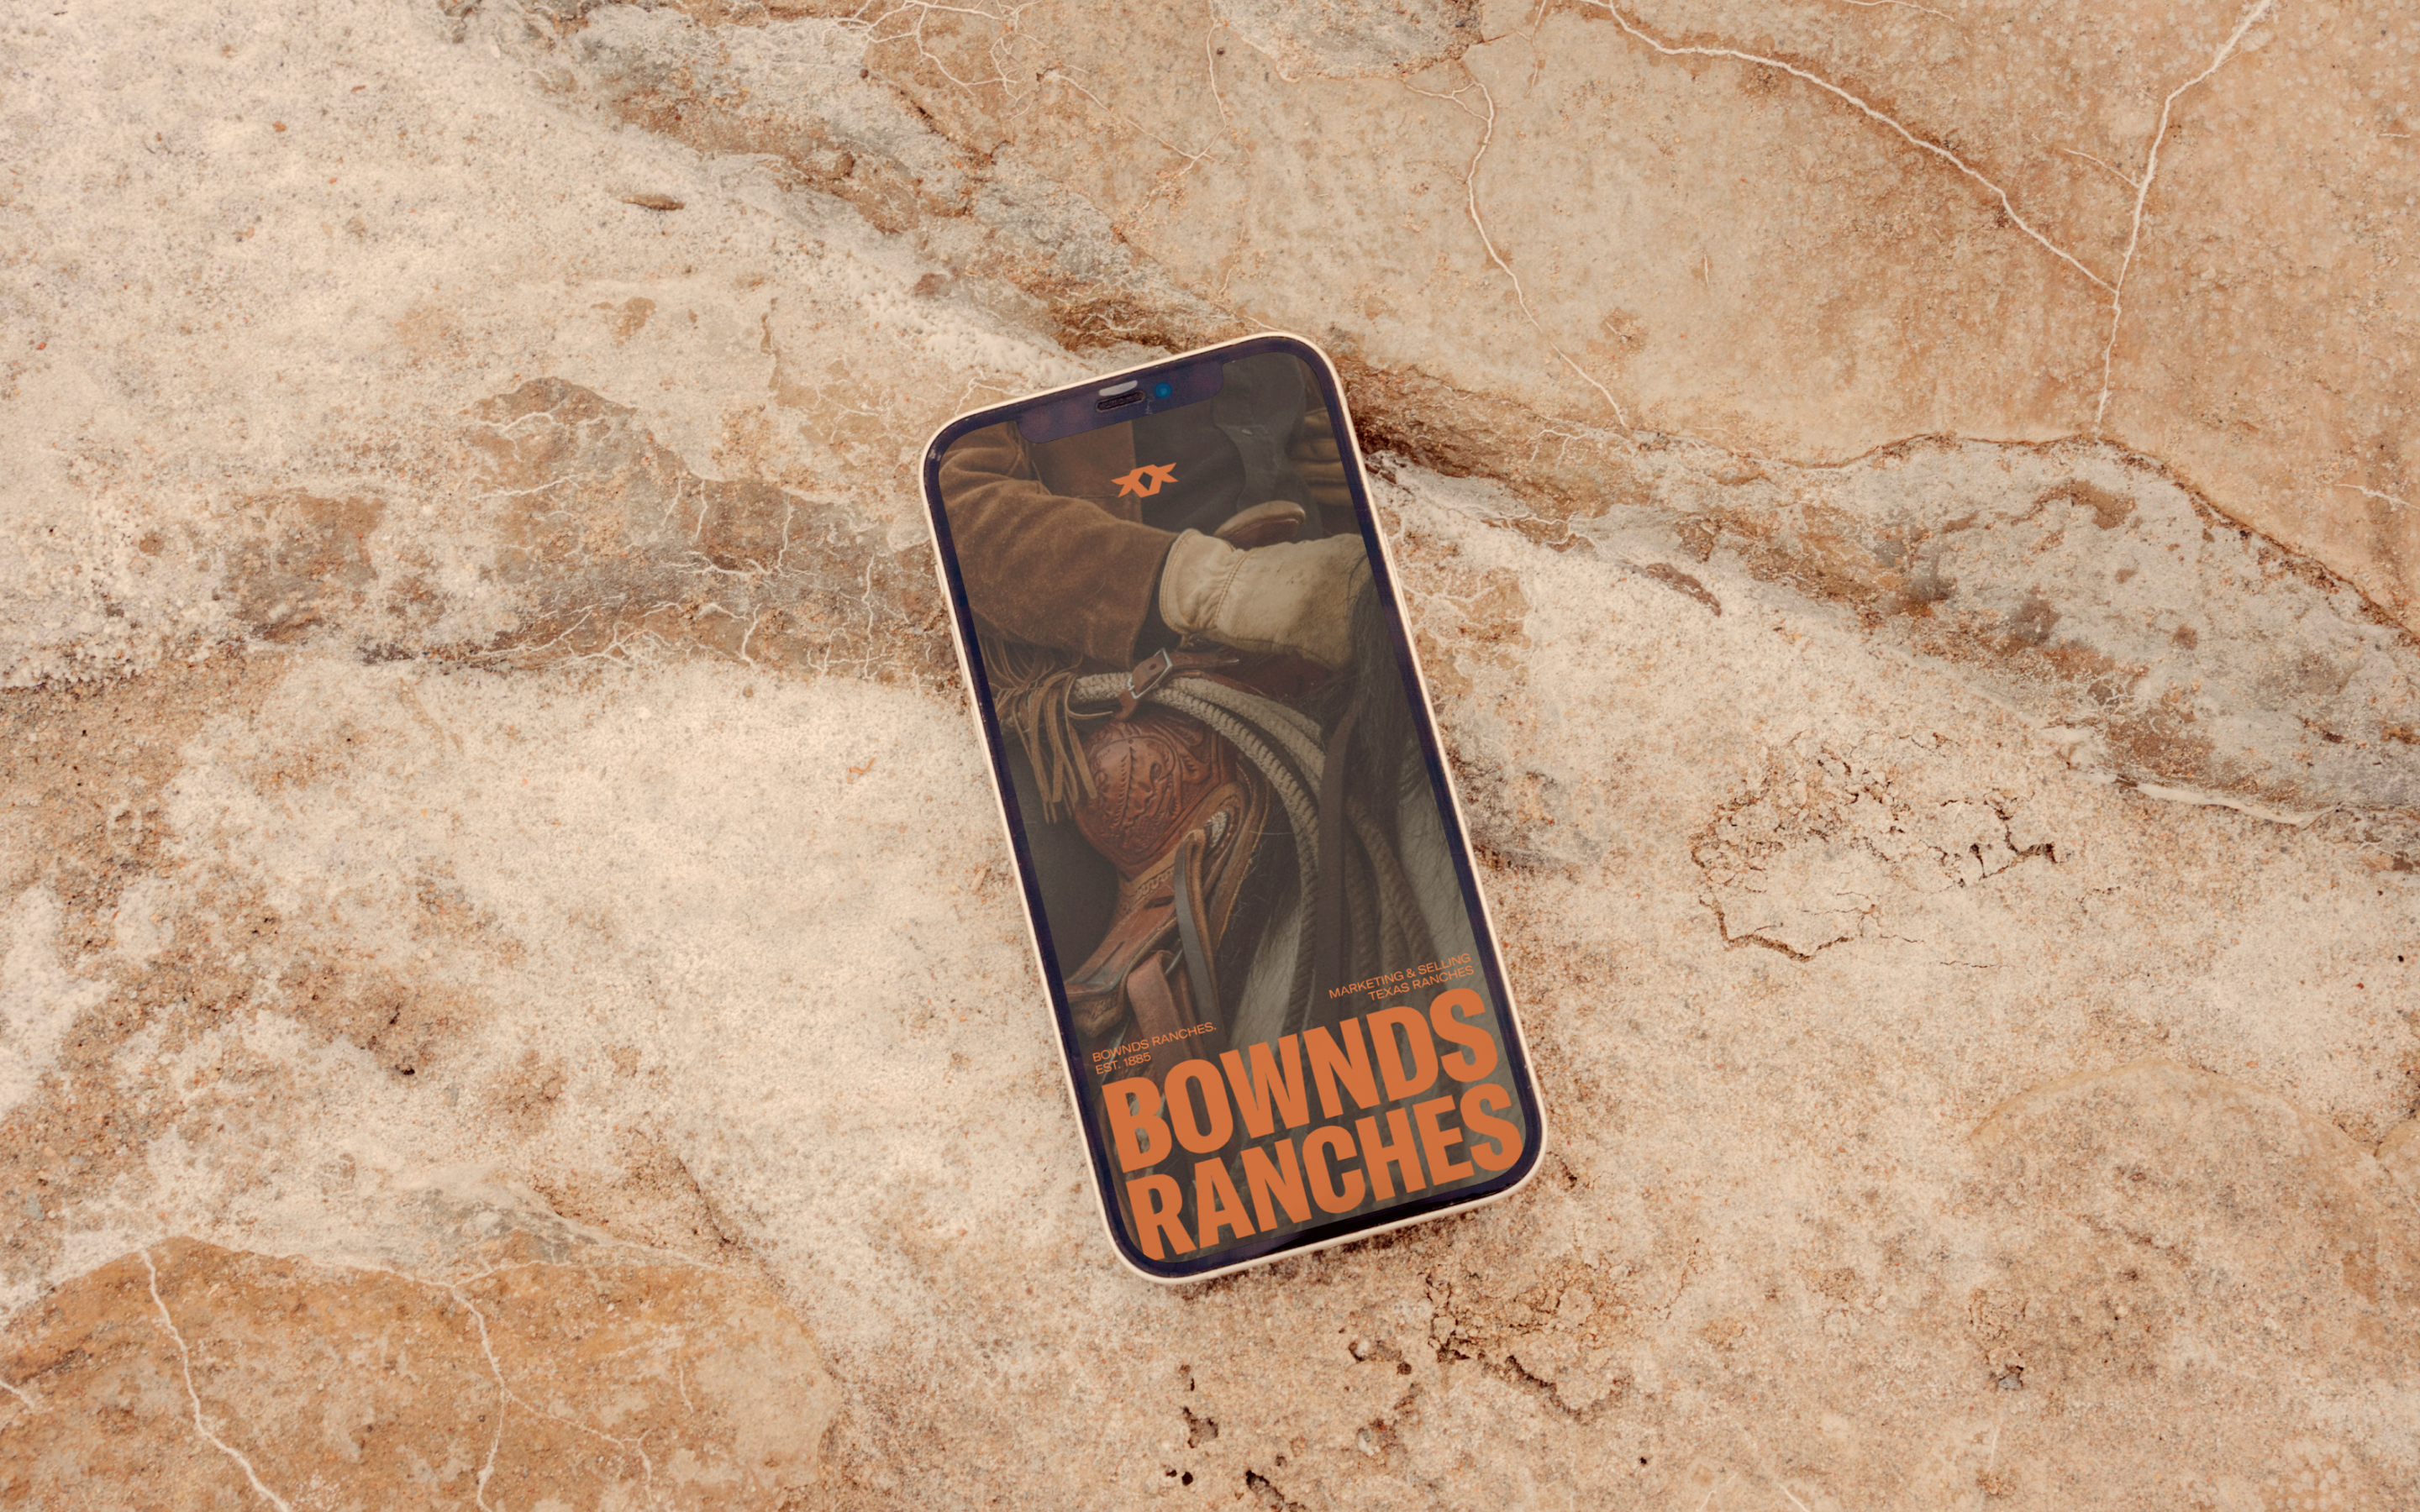 Bownds Ranches website on a mobile phone sitting on a sandstone background